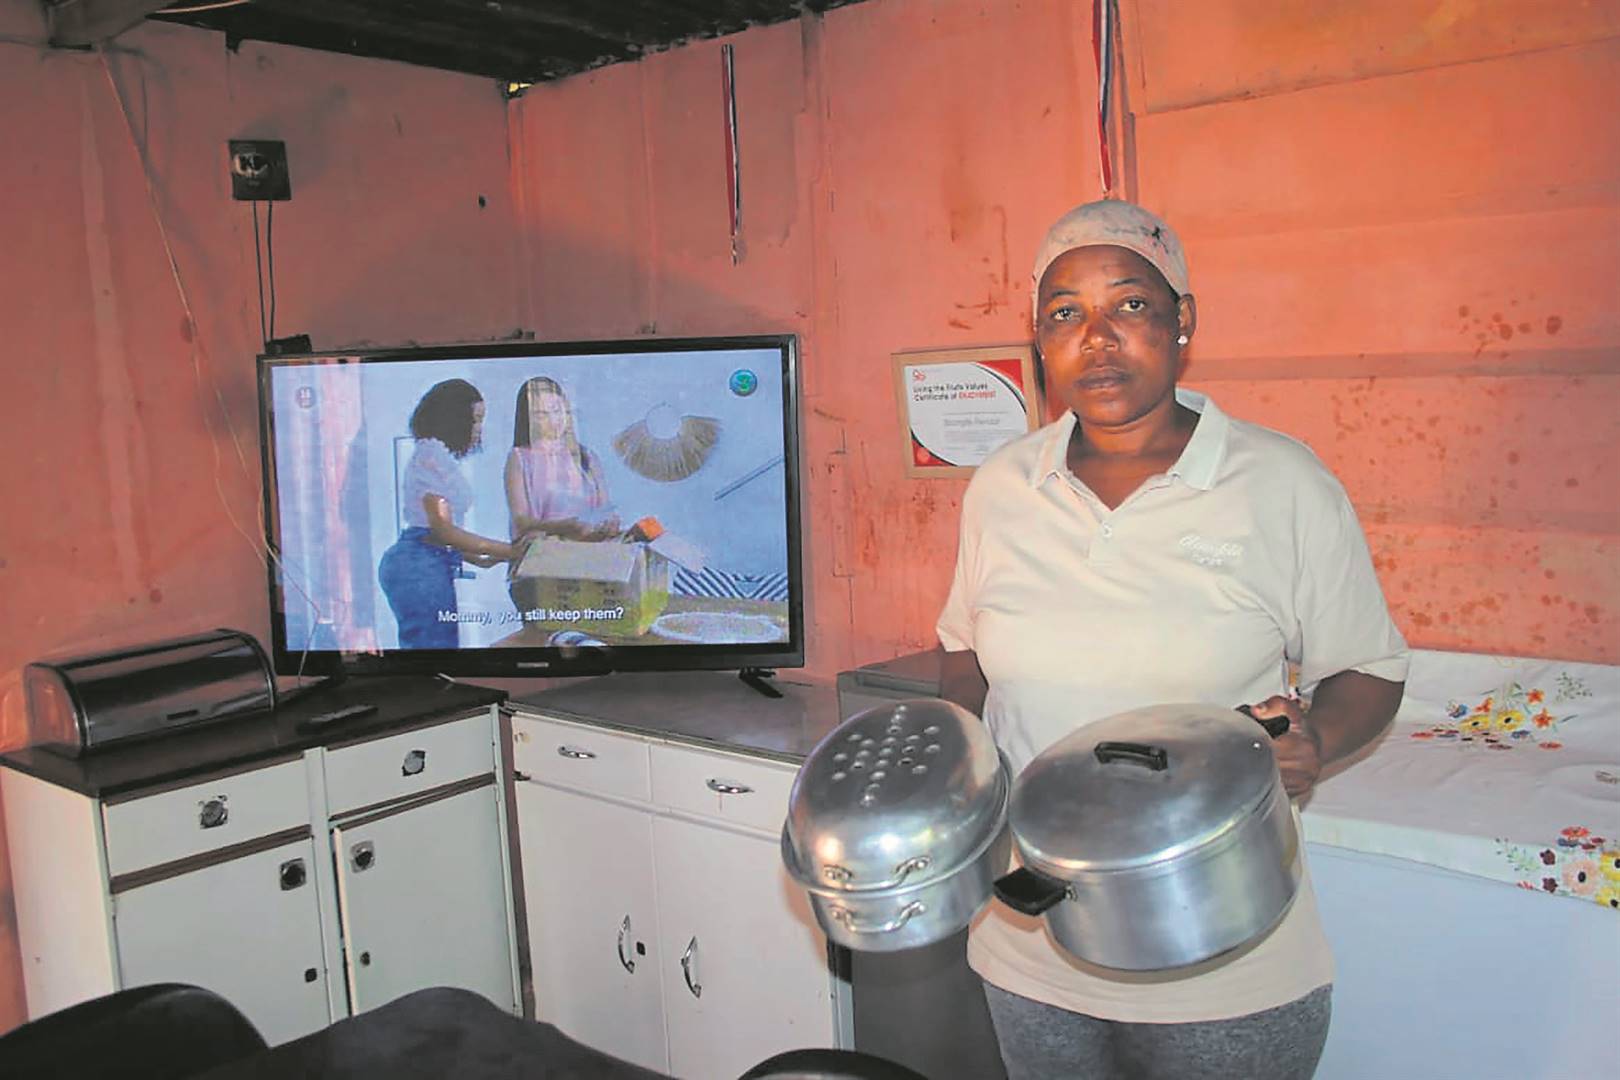 Sibongile Mthembu got some of her stolen pots and TV back after the thug led residents to a scrapyard where he sold the goods. Photo by Phineas Khoza